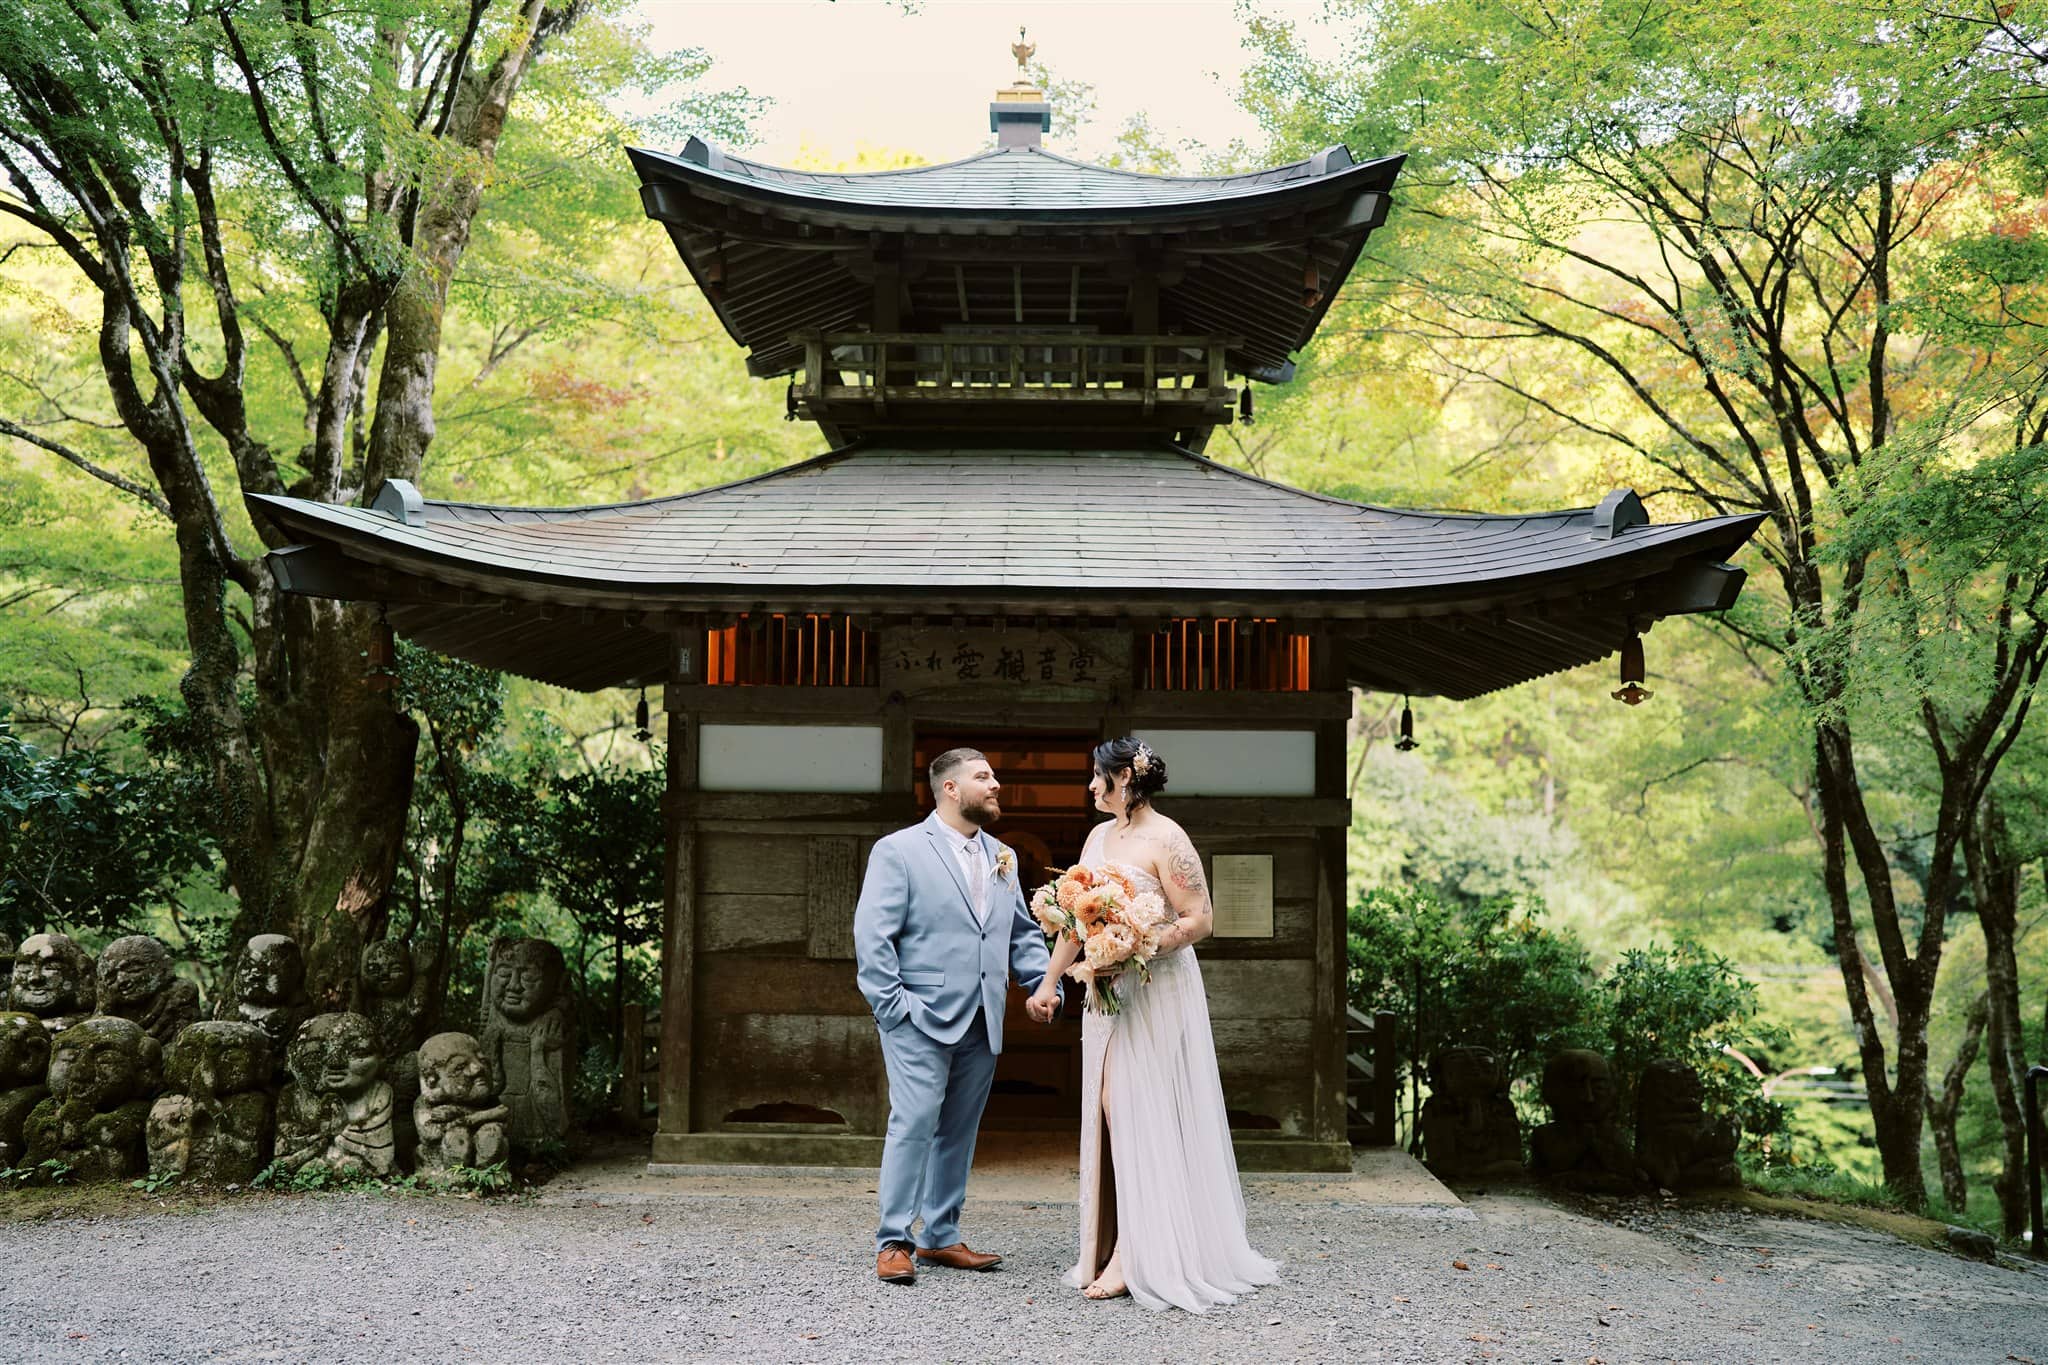 Kyoto Tokyo Japan Elopement Wedding Photographer, Planner & Videographer | A japan elopement couple, beautifully captured by their photographer, standing in front of a pagoda.